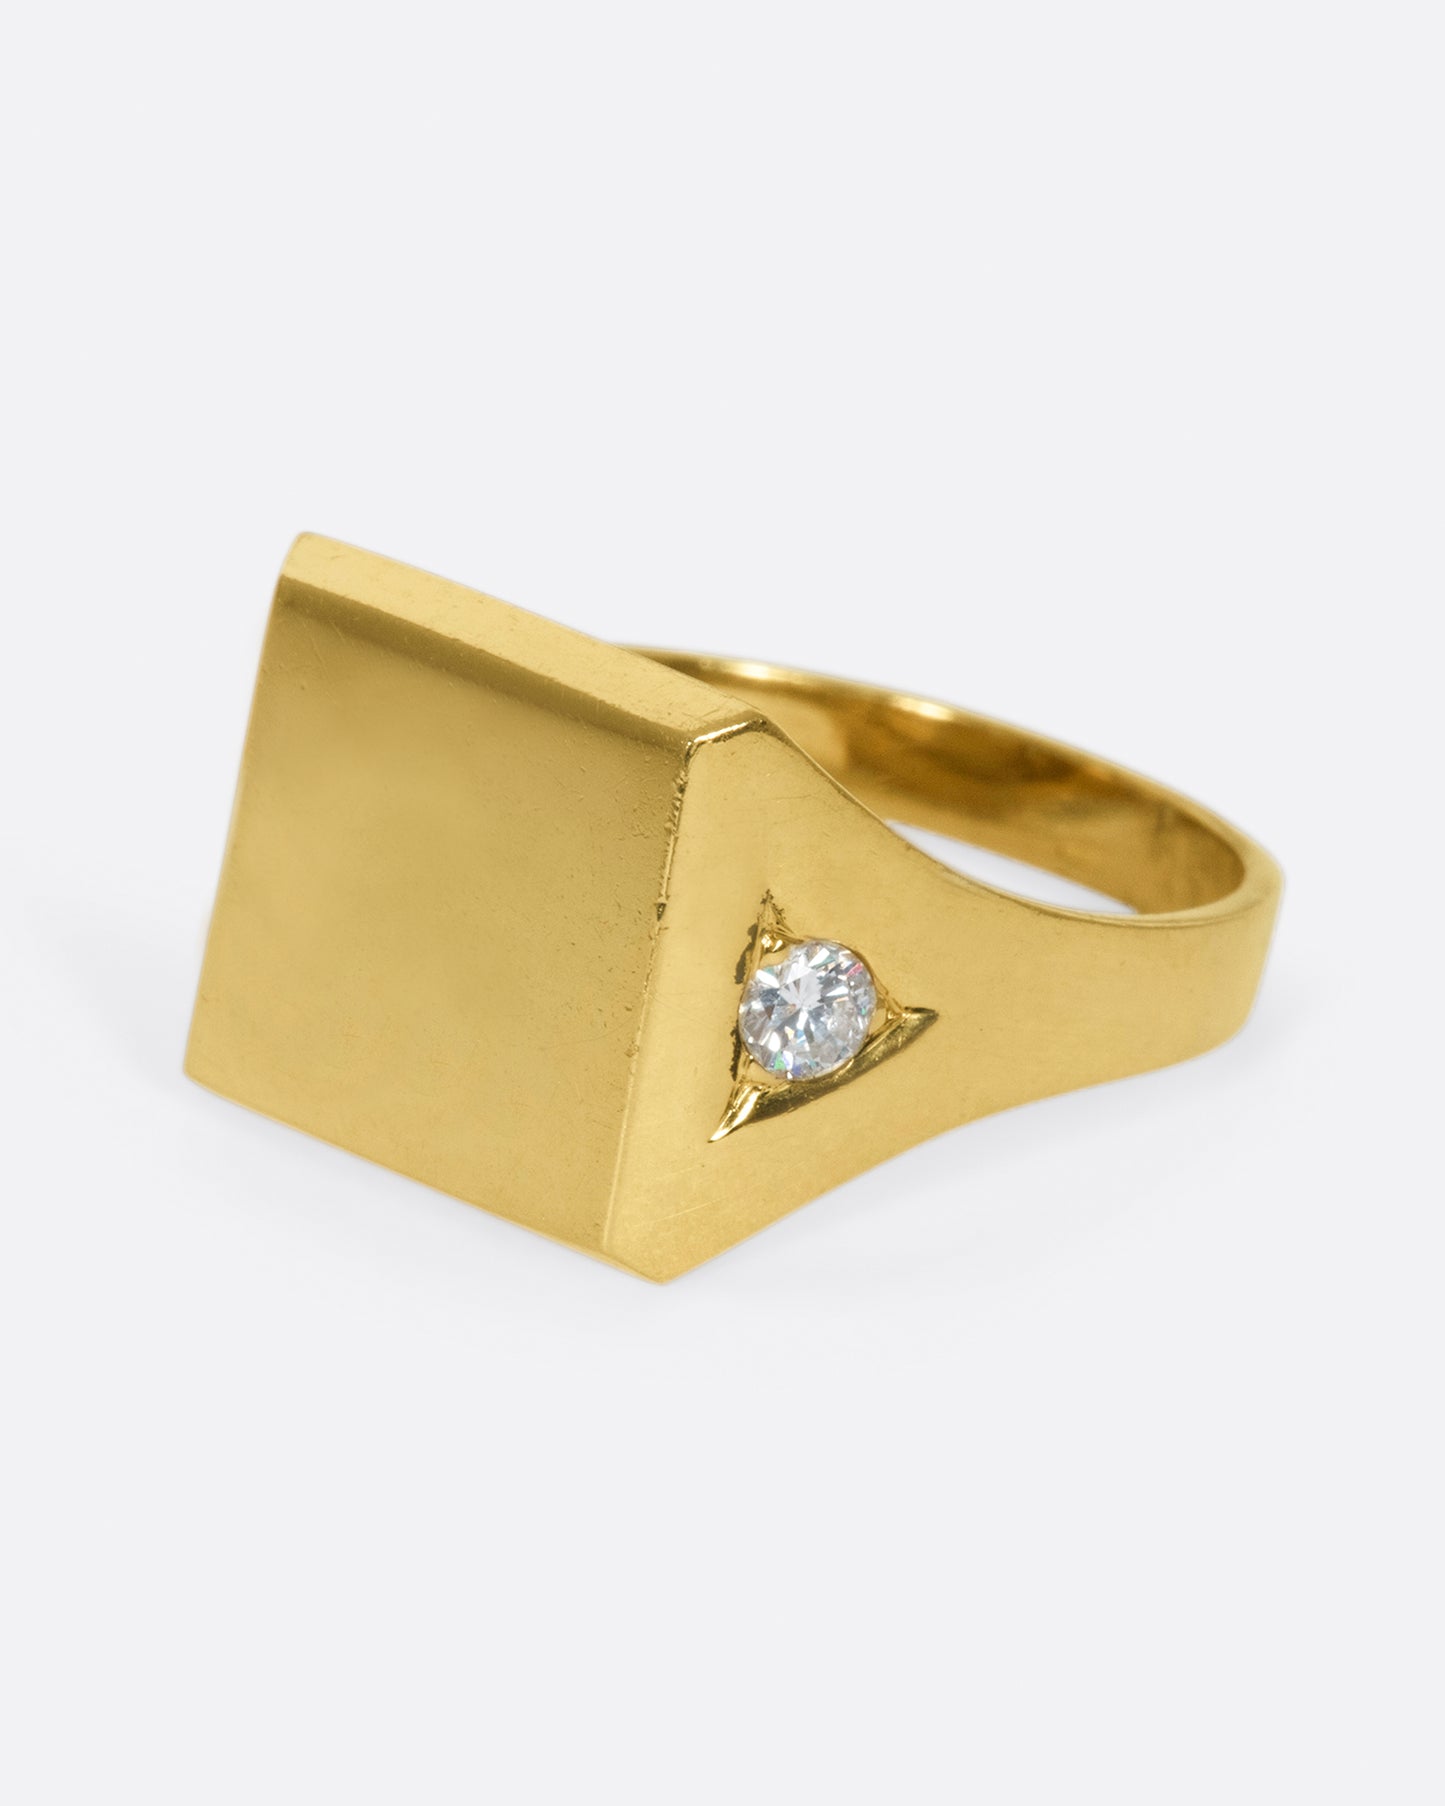 This blank signet is just as cool as is, with its diamond accents, as it would be with your or a loved one's initials.